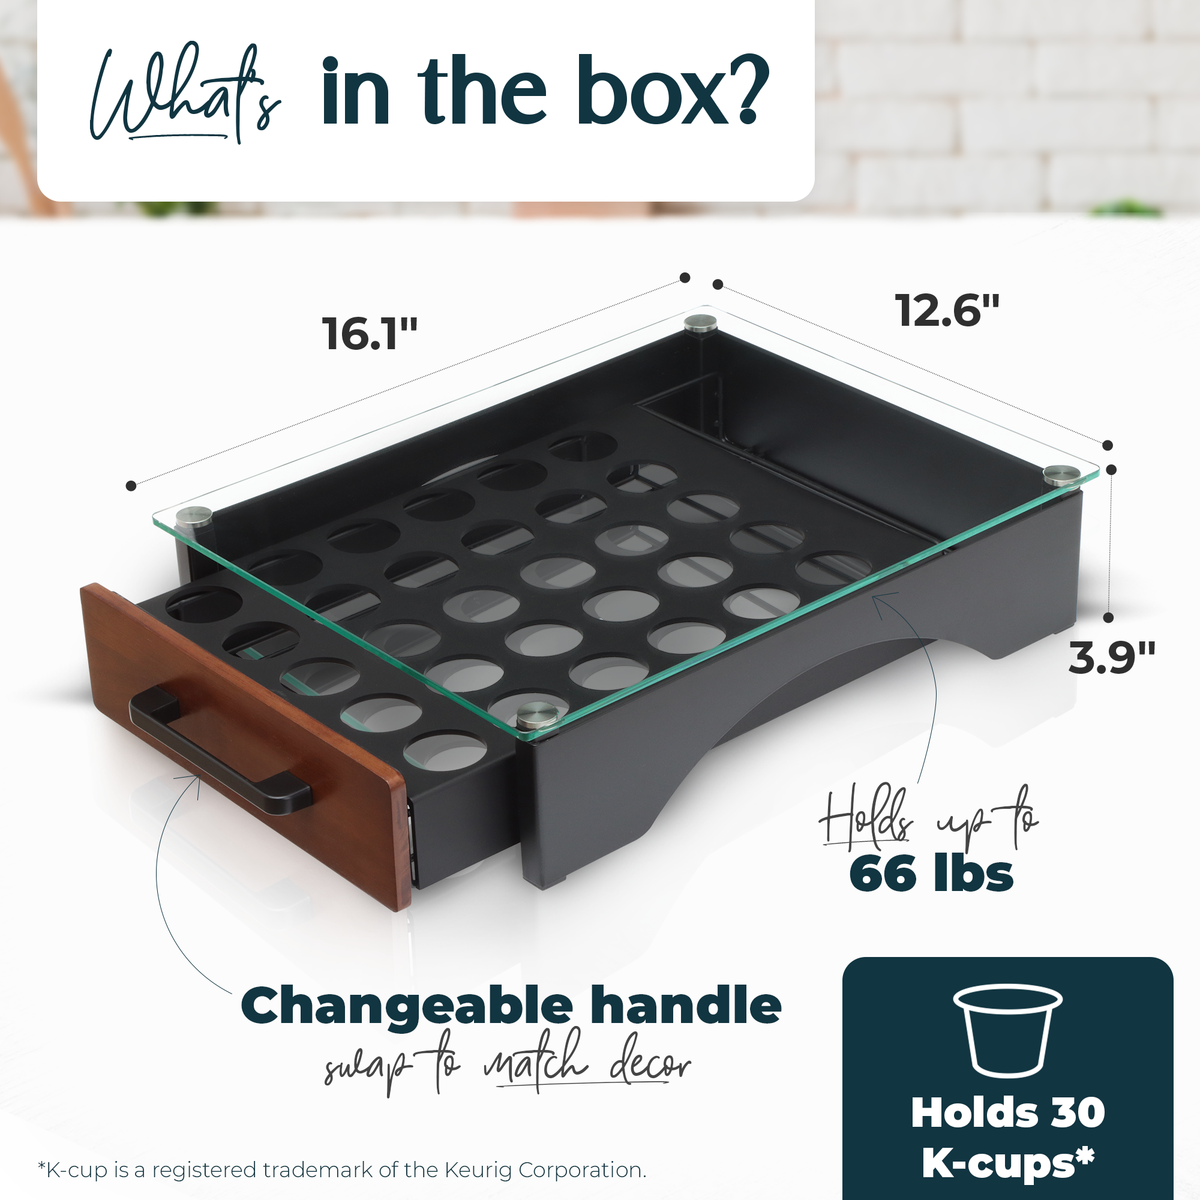 K Cup Organizer product inclusions and dimensions that holds up to 30 K-Cups. With changeable handle that you can swap to match decor